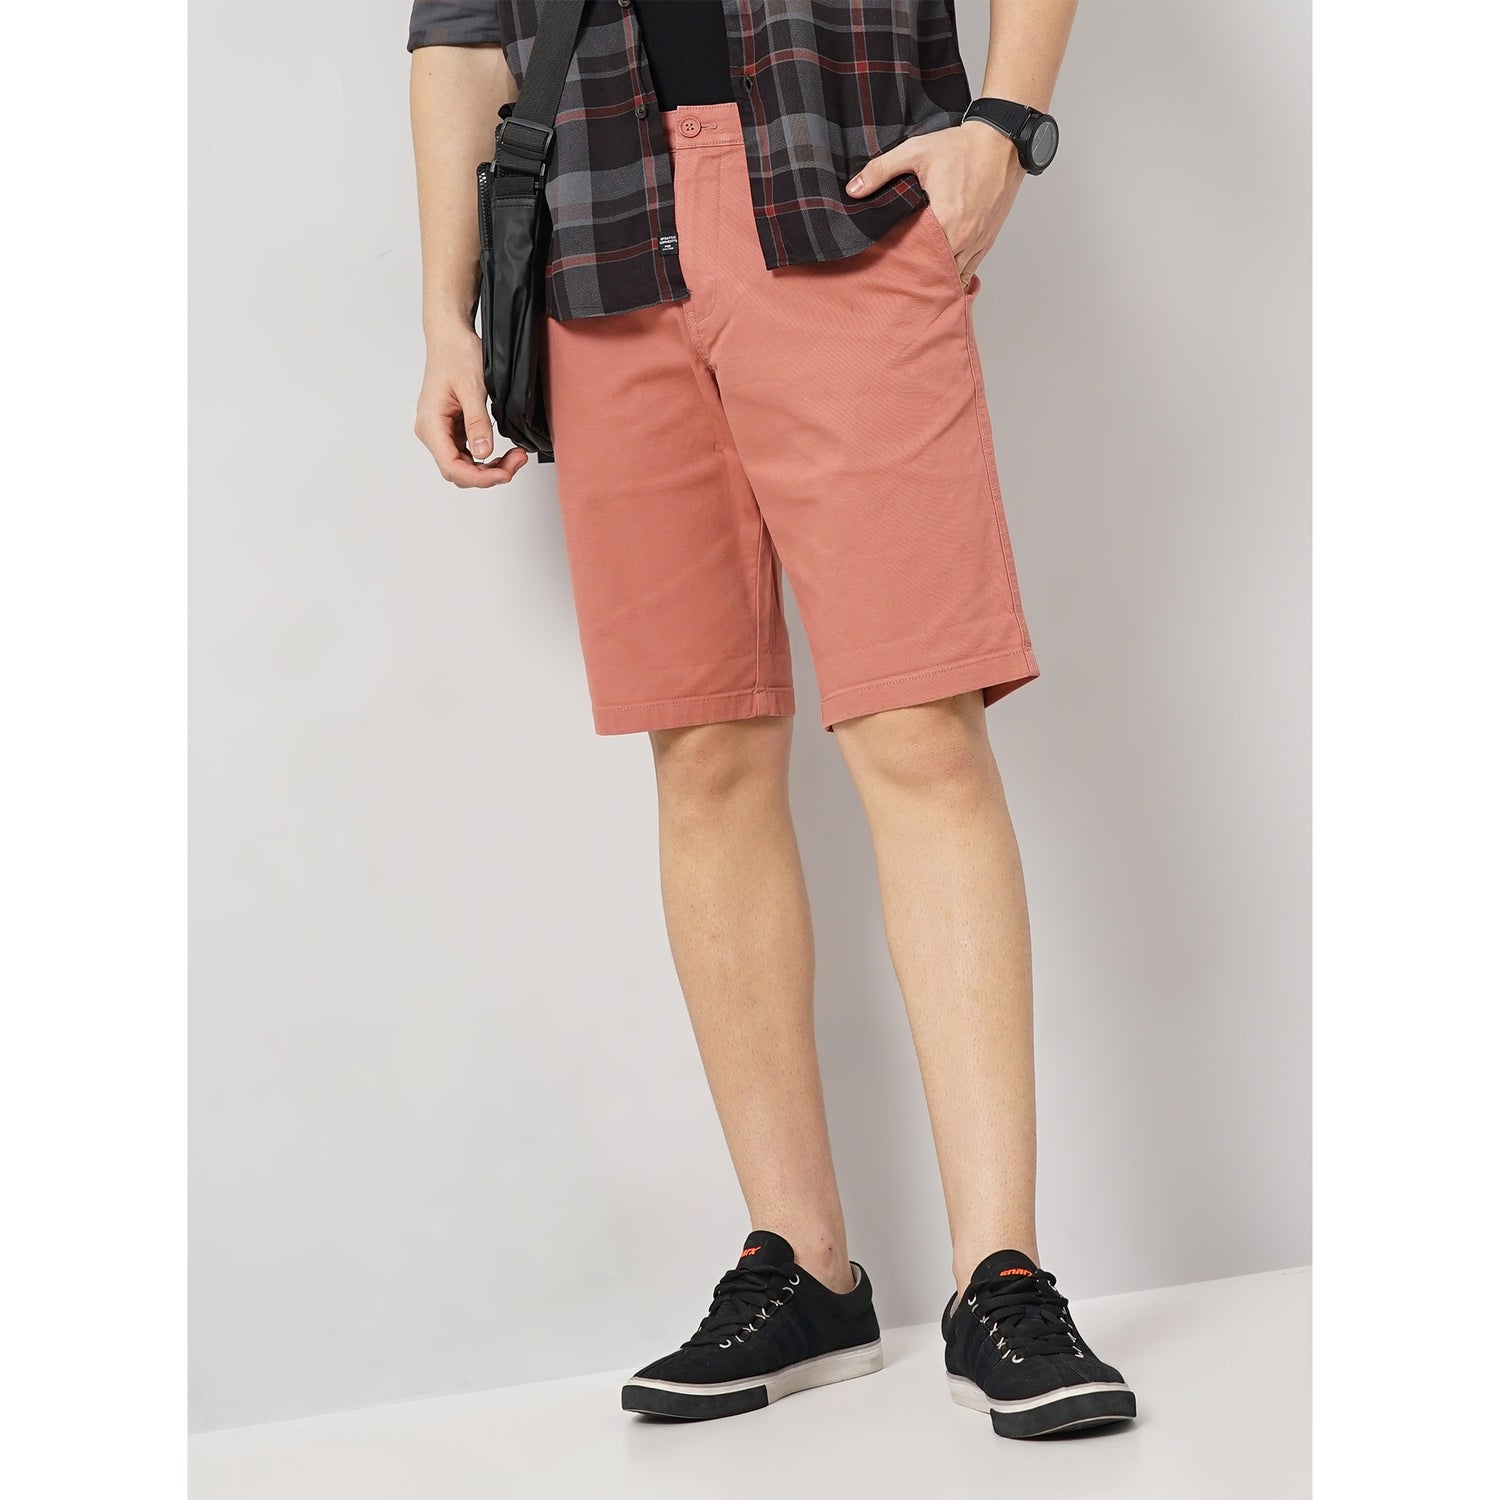 Men Pink Solid Loose Fit Cotton Chinos Casual Short (BOCHINOBM2)